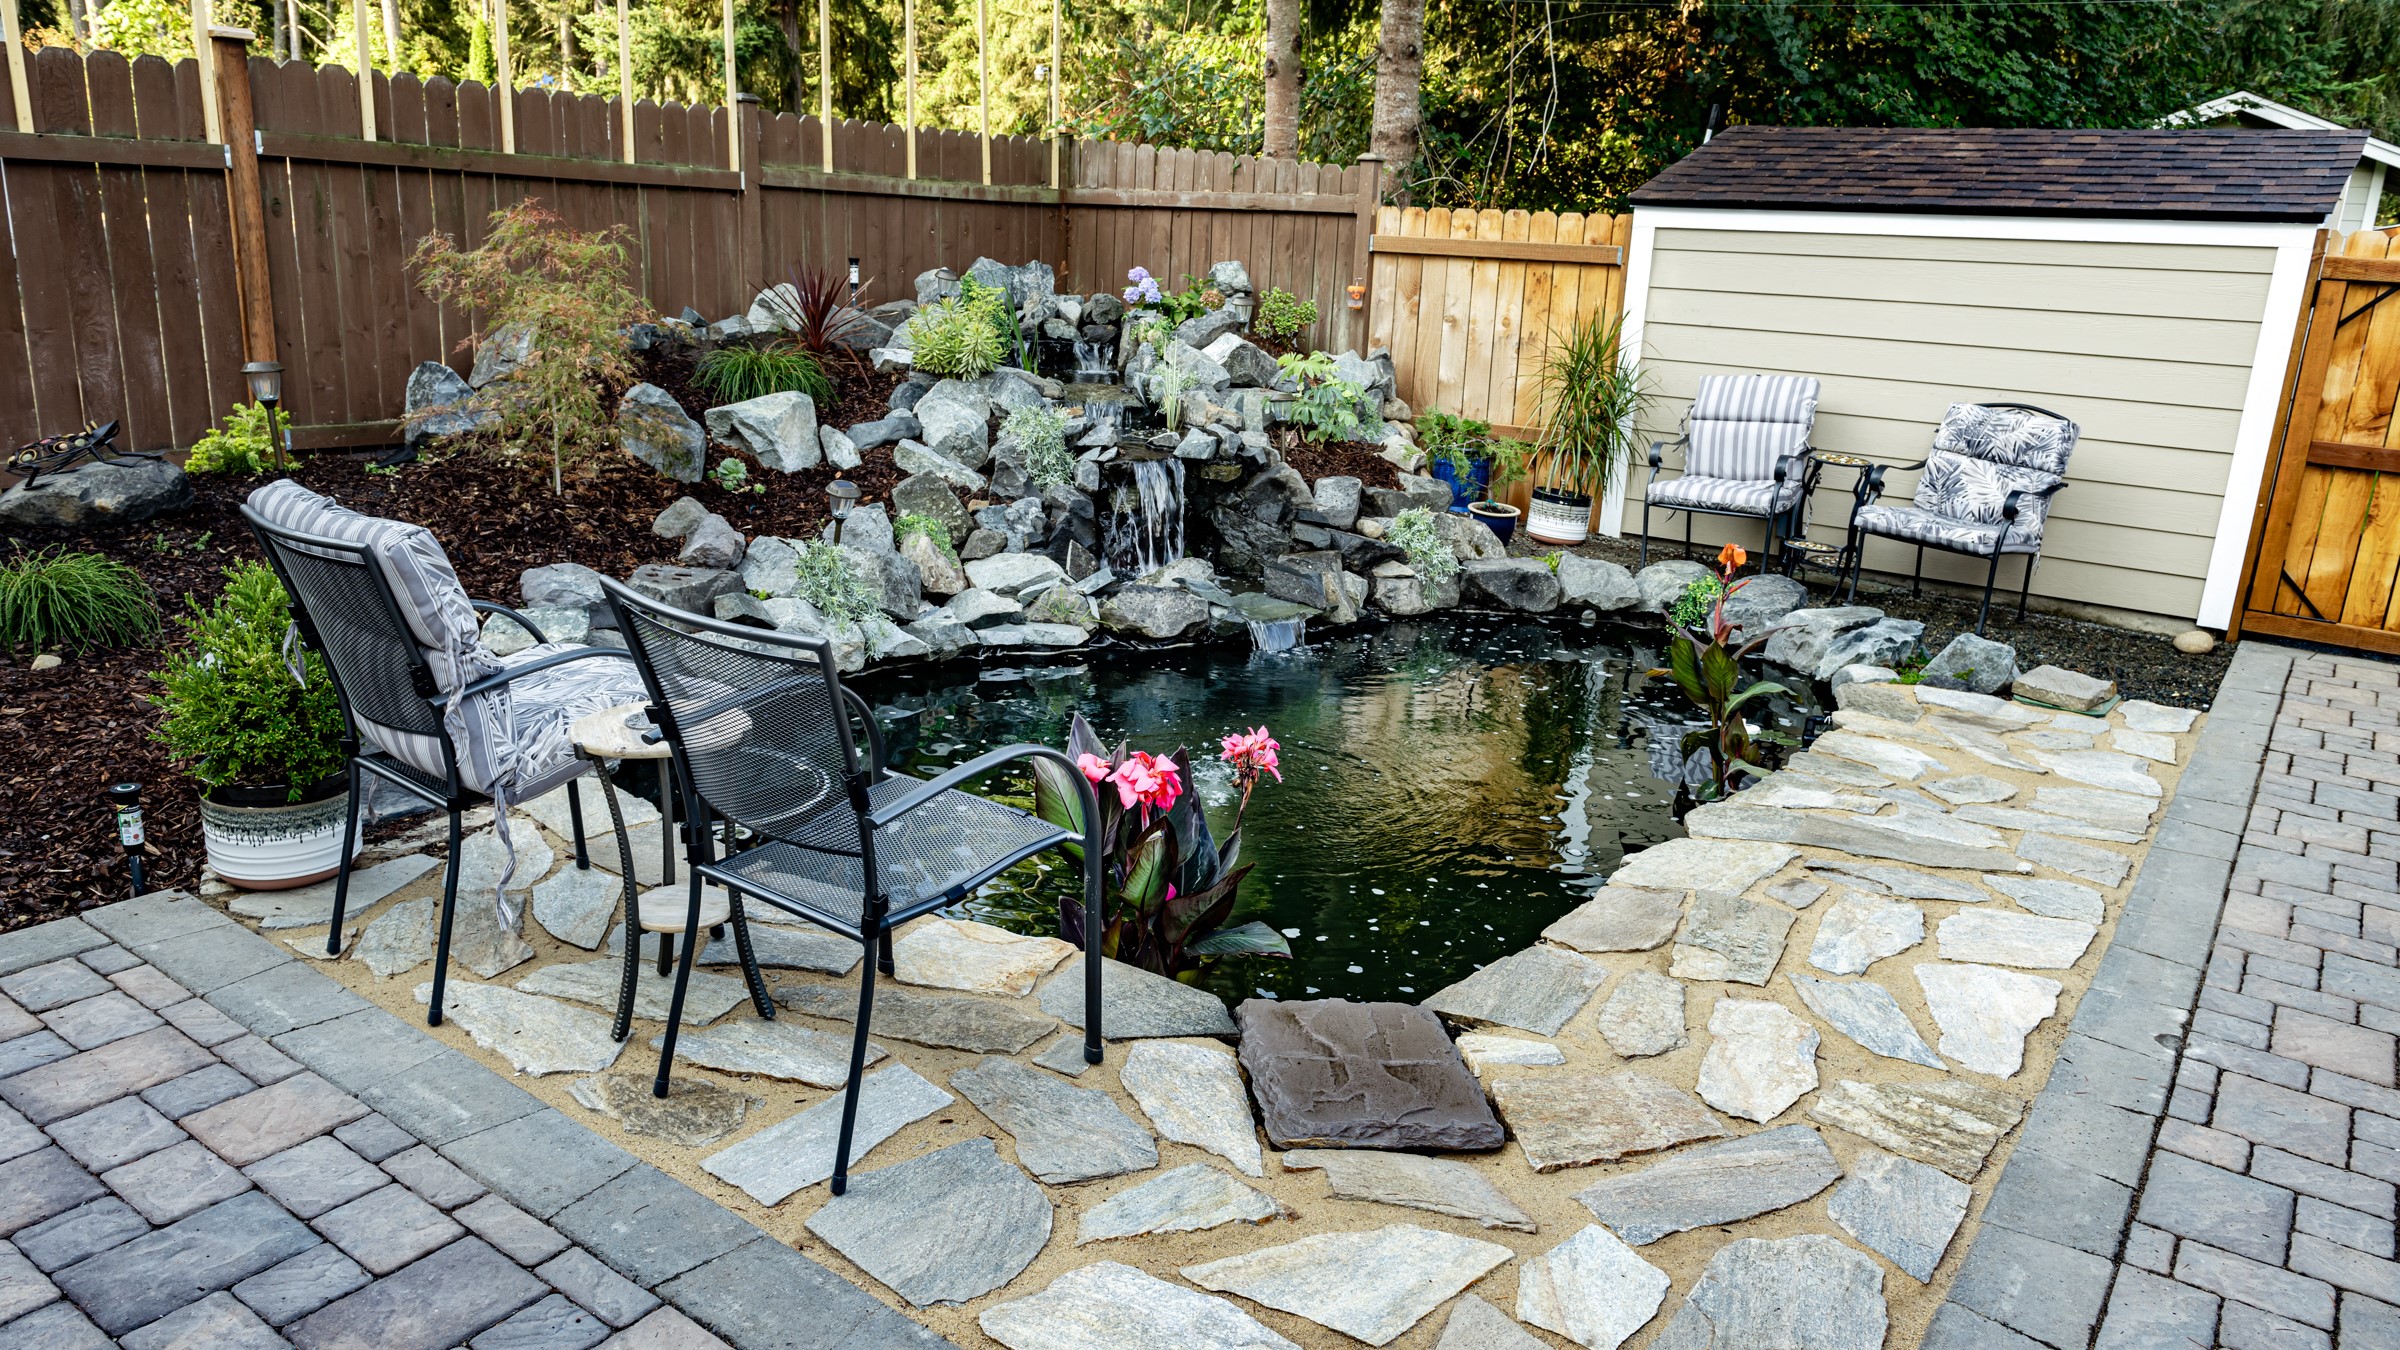 Mixing materials in your hardscape project creates an appealing visual contrast